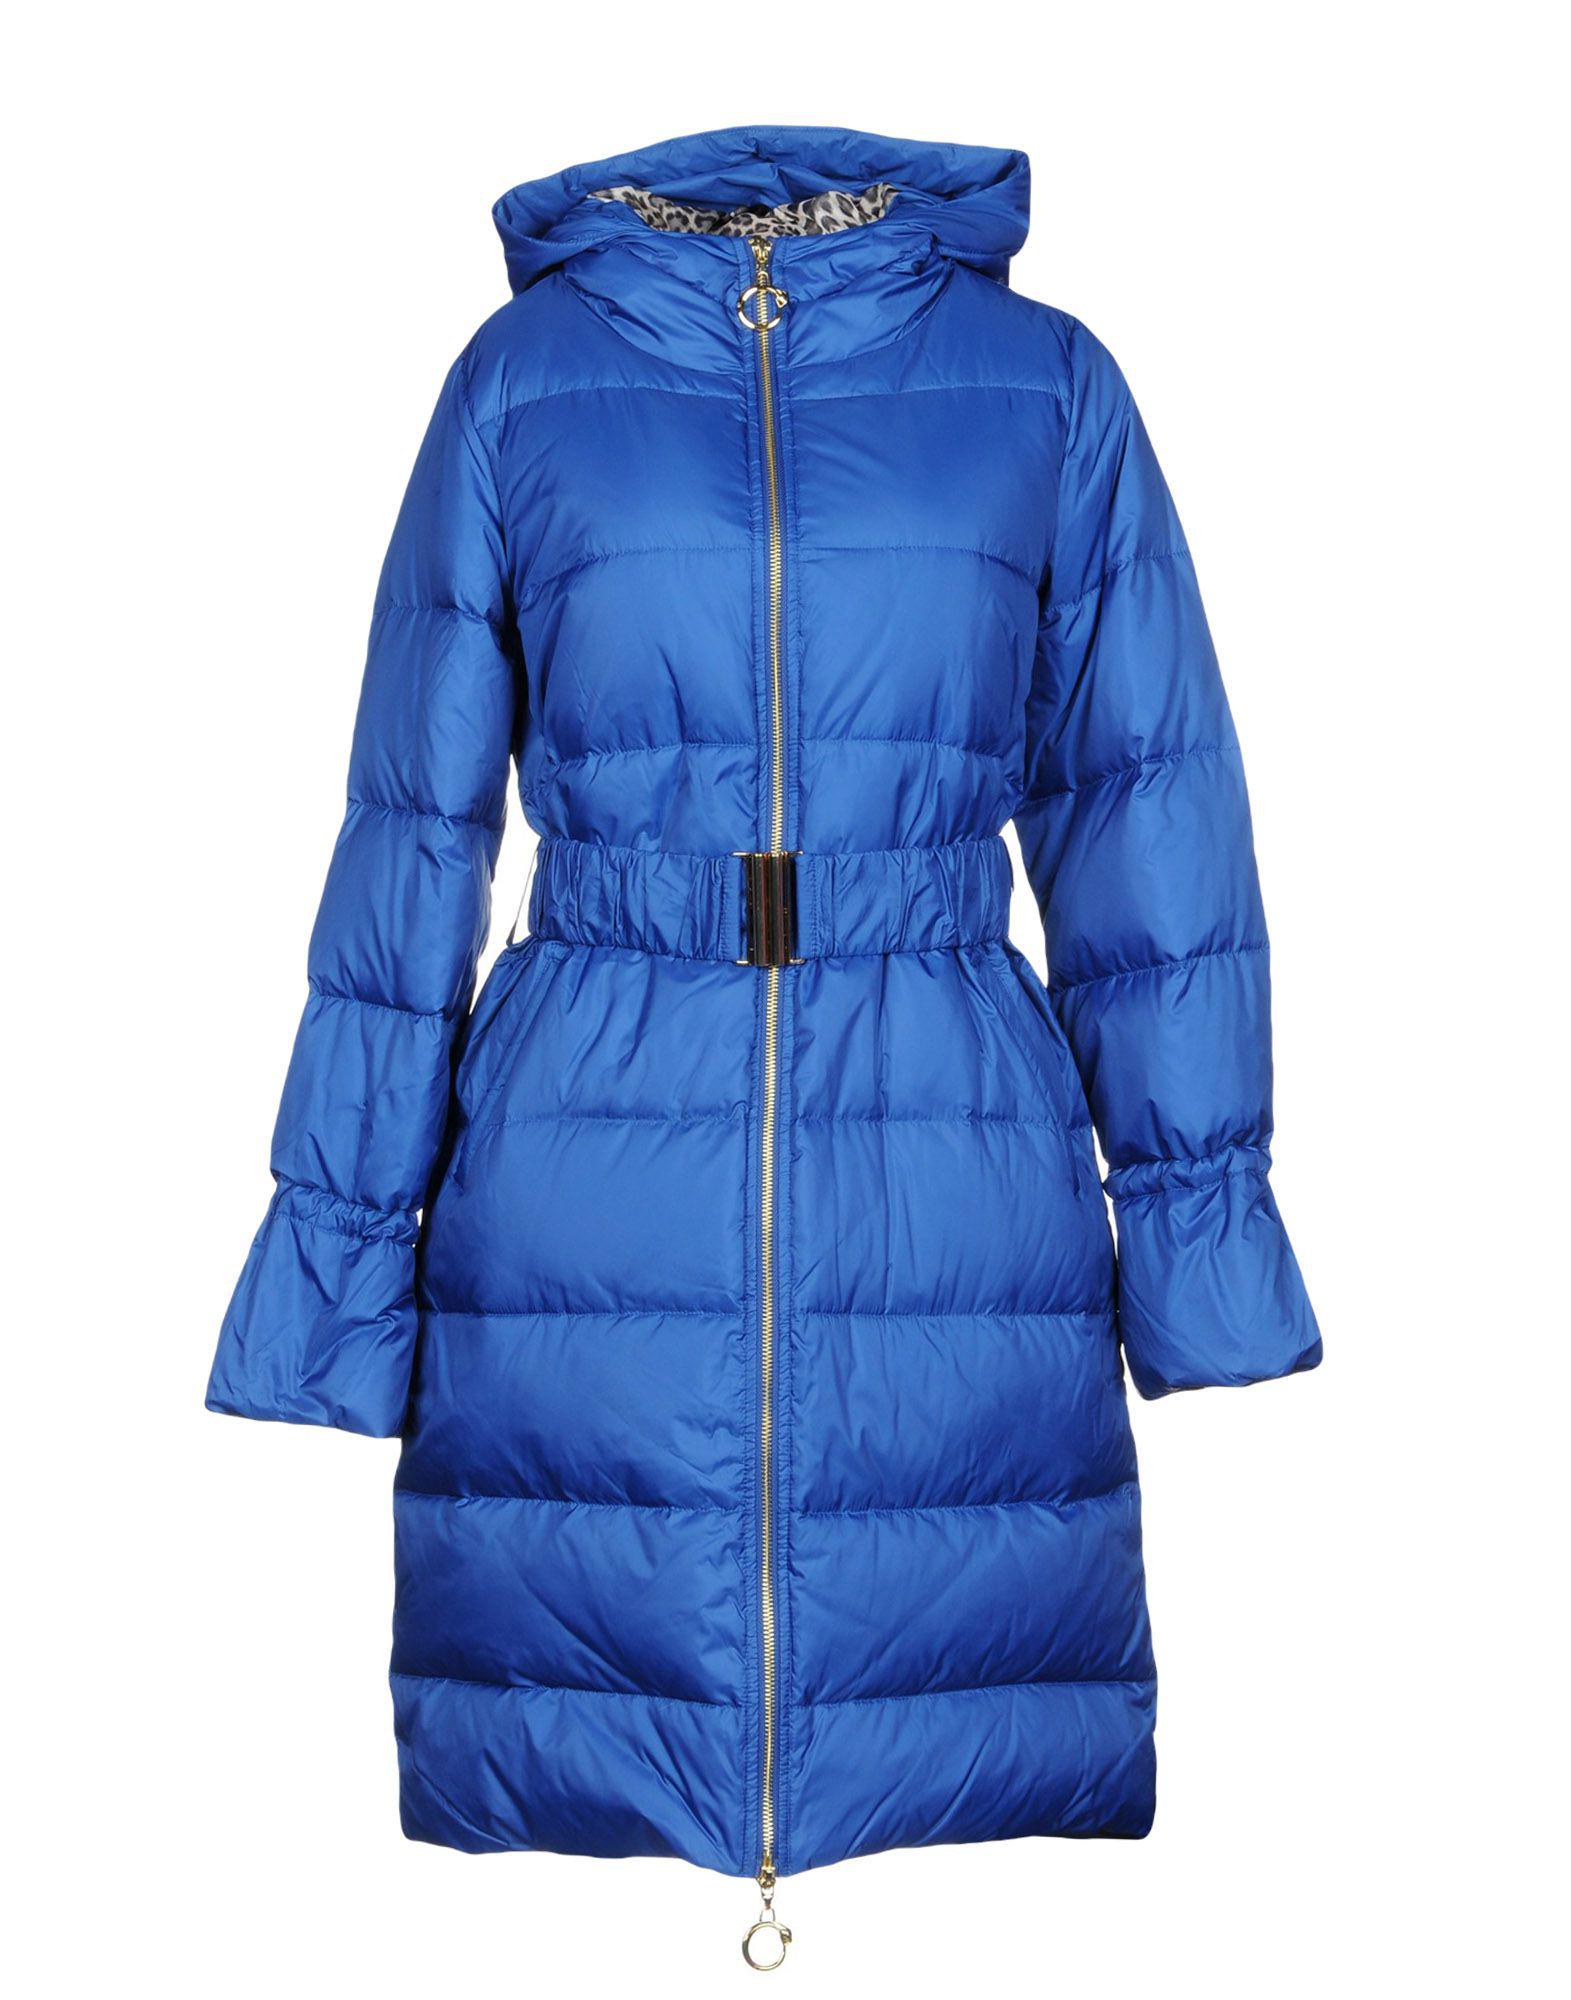 Class Roberto Cavalli Synthetic Down Jacket in Blue - Lyst